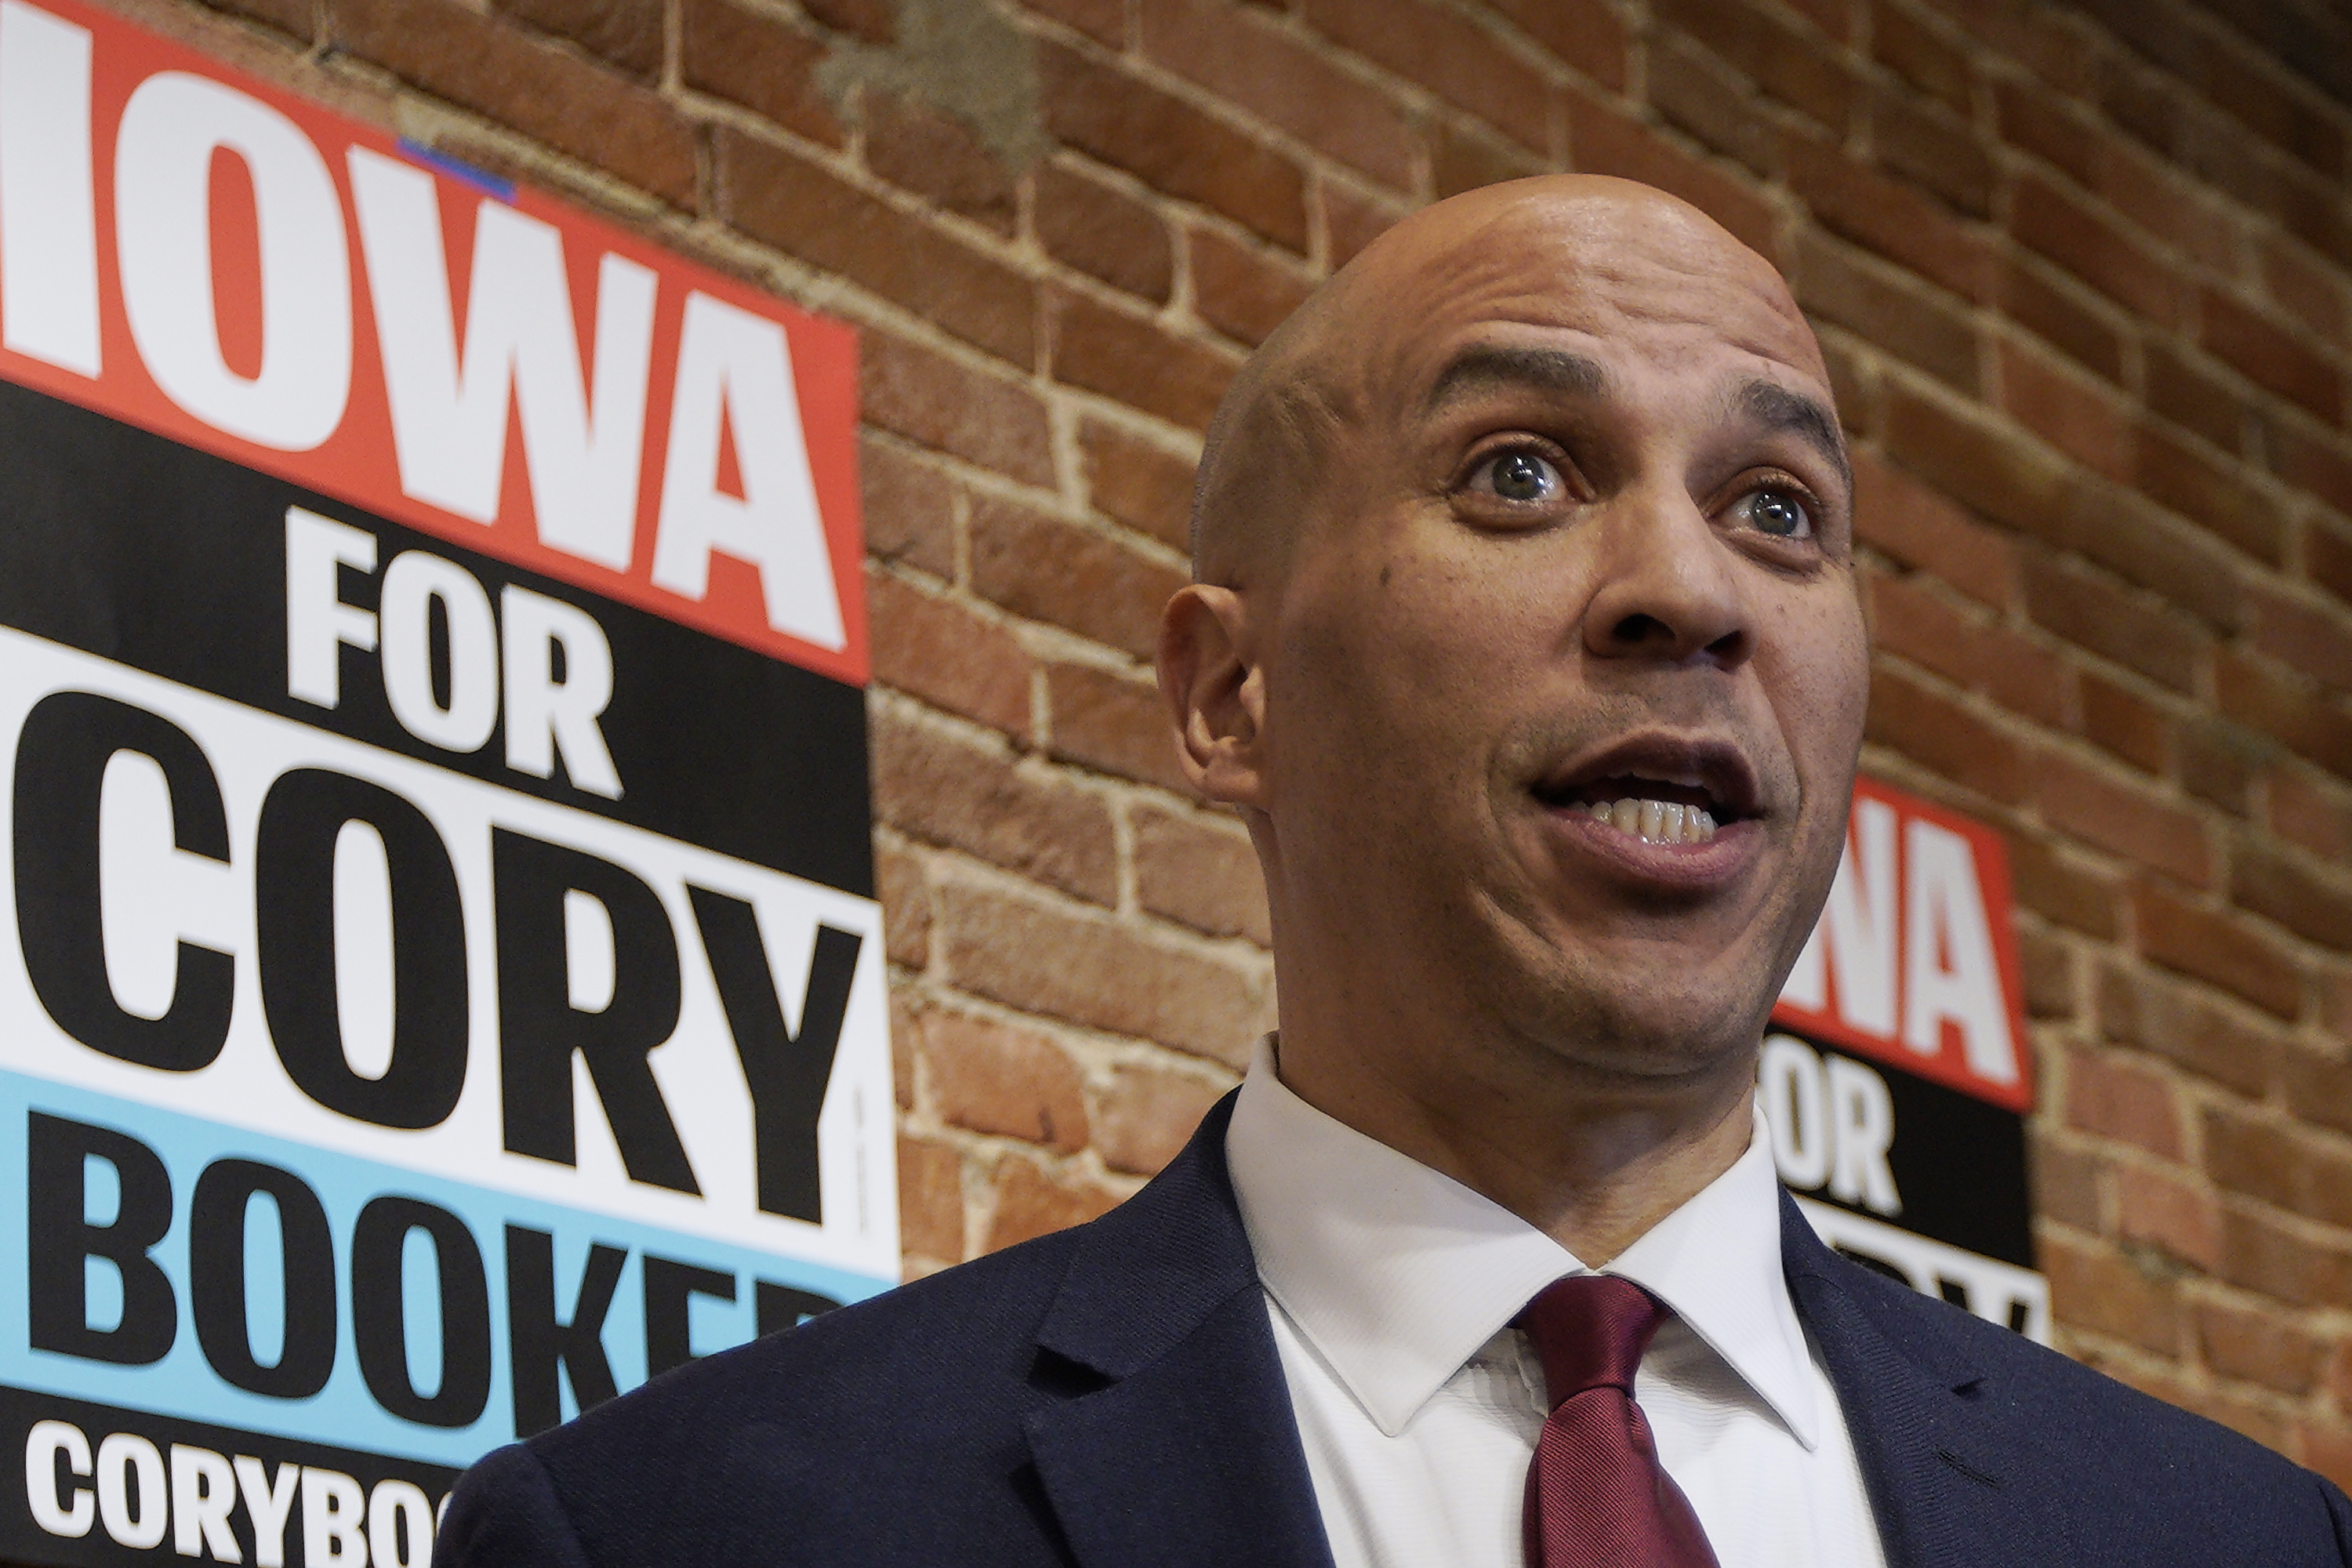 Cory Booker News, Articles, Stories & Trends for Today3000 x 2000